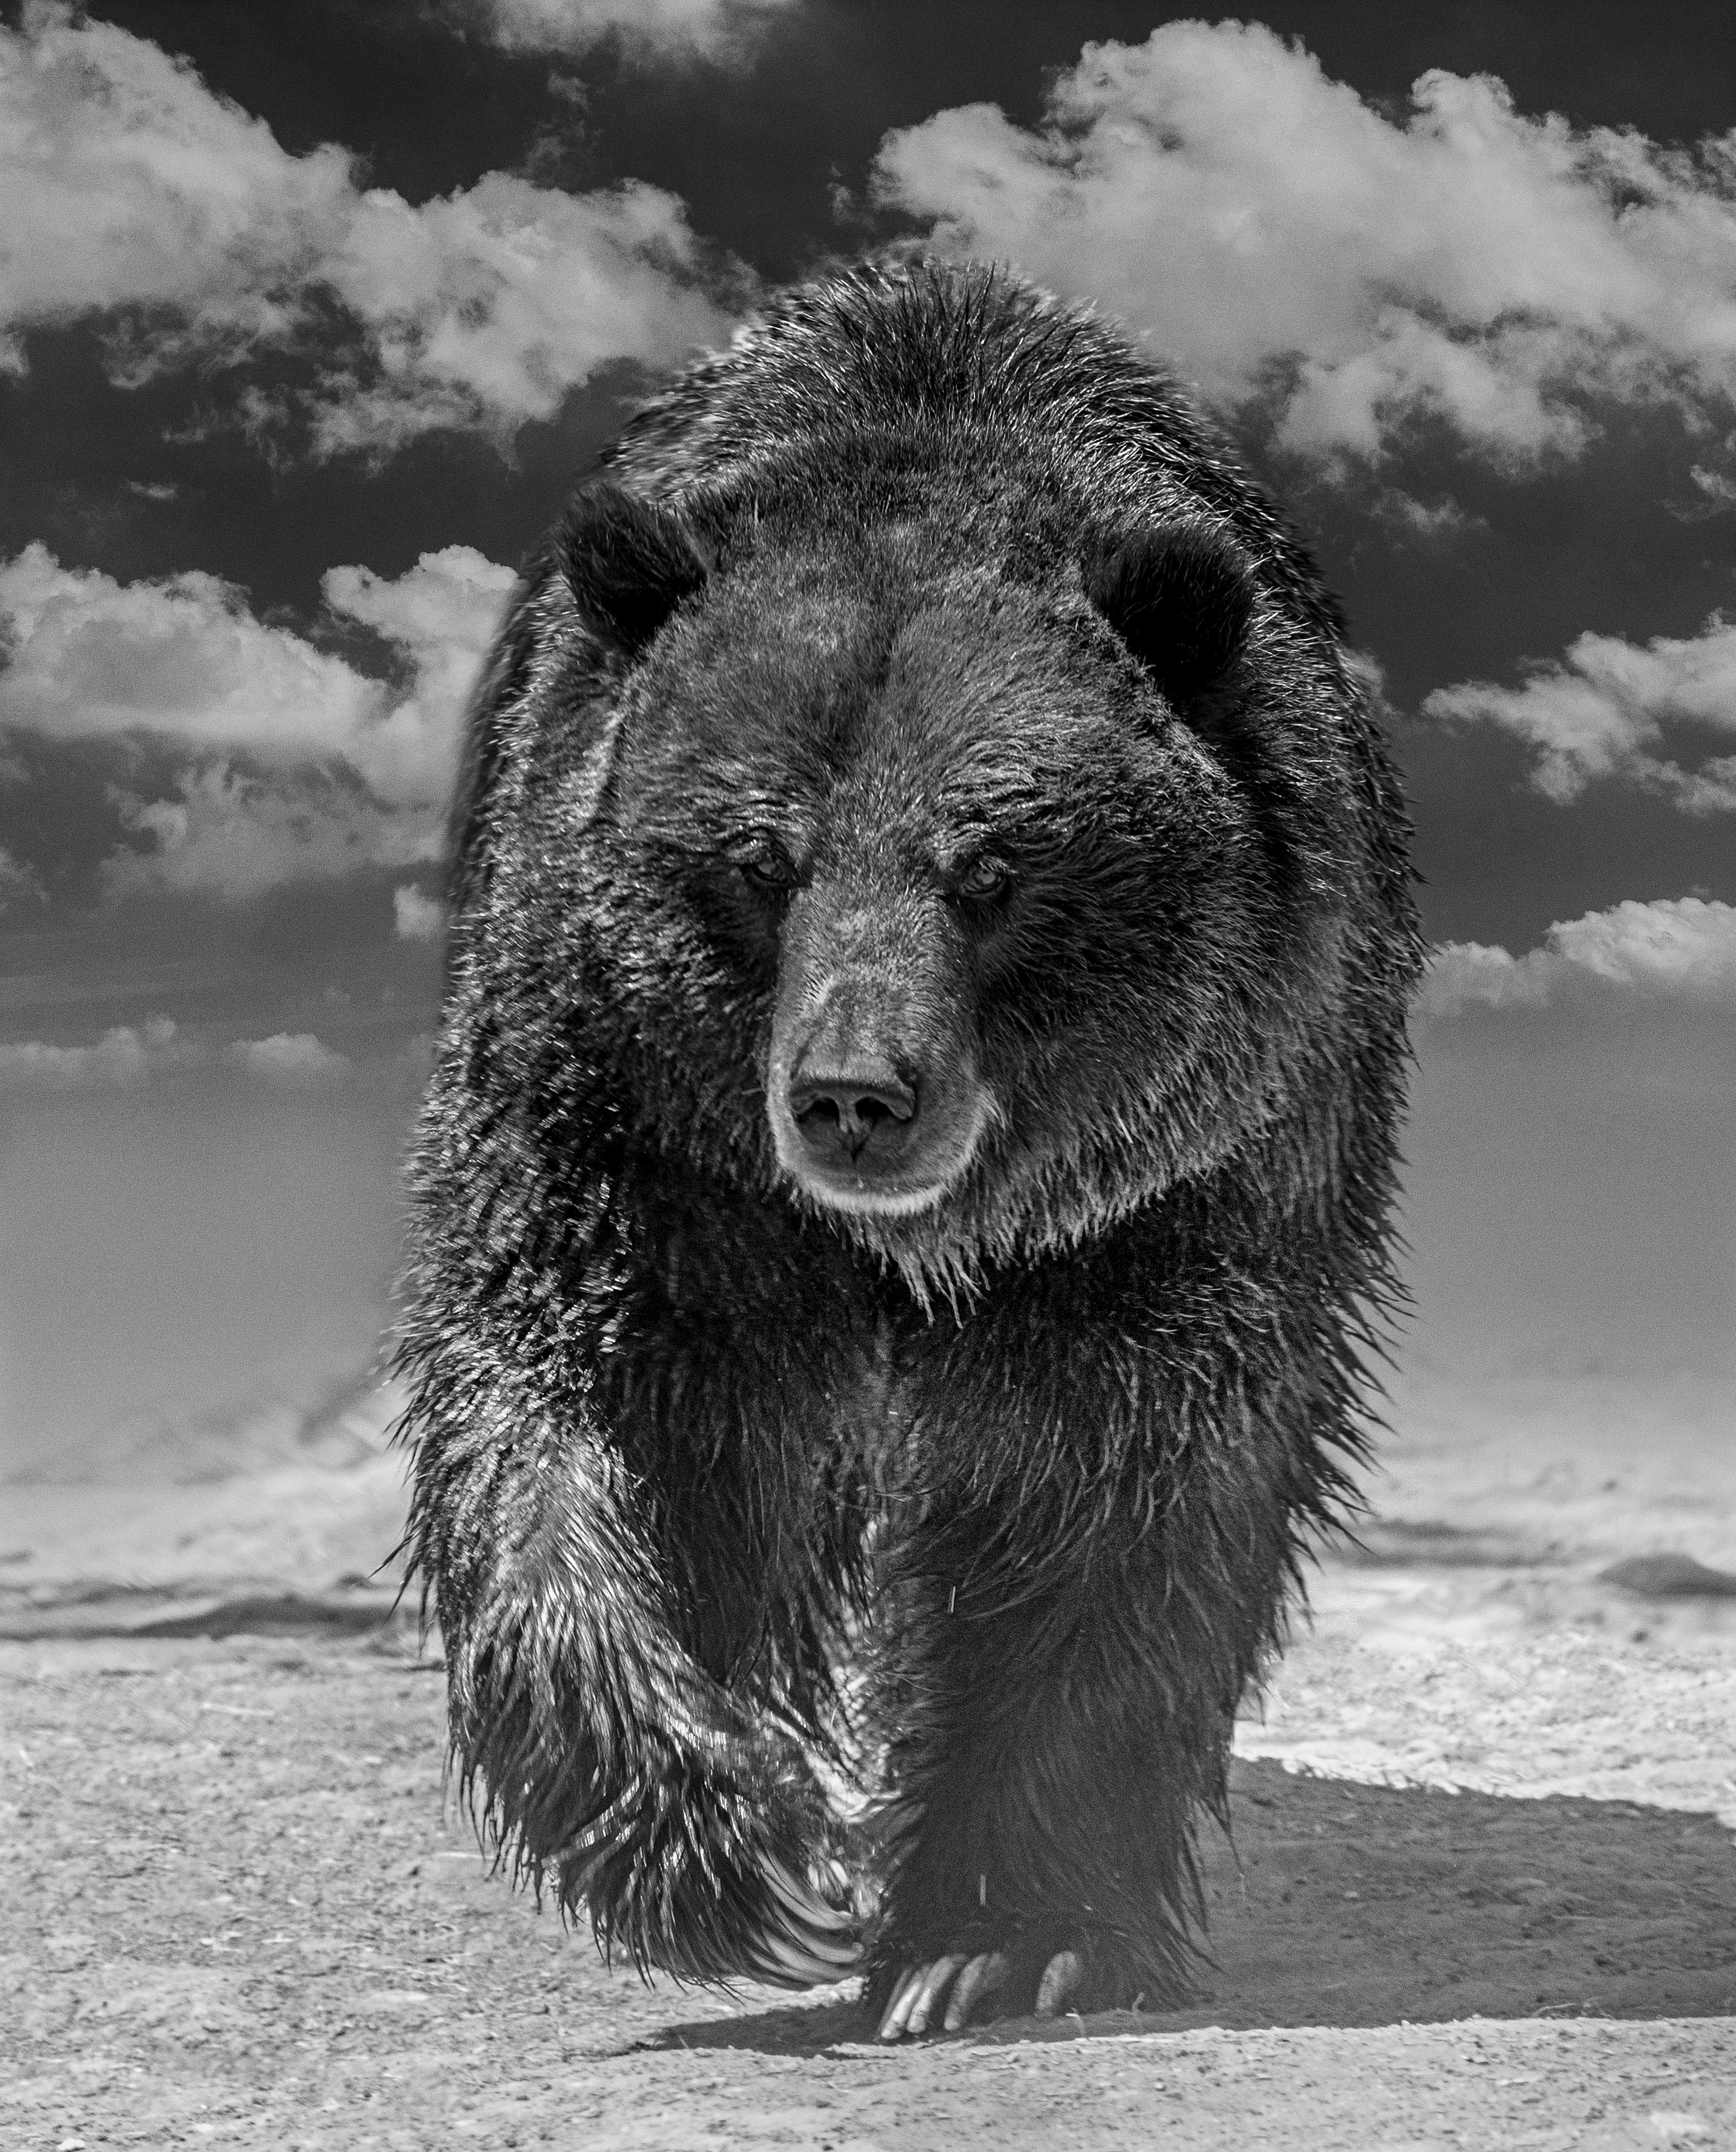 Shane Russeck Black and White Photograph - "Grizzly Shores" 36x48 -  Black & White Photograph Grizzly Bear Unsigned Print